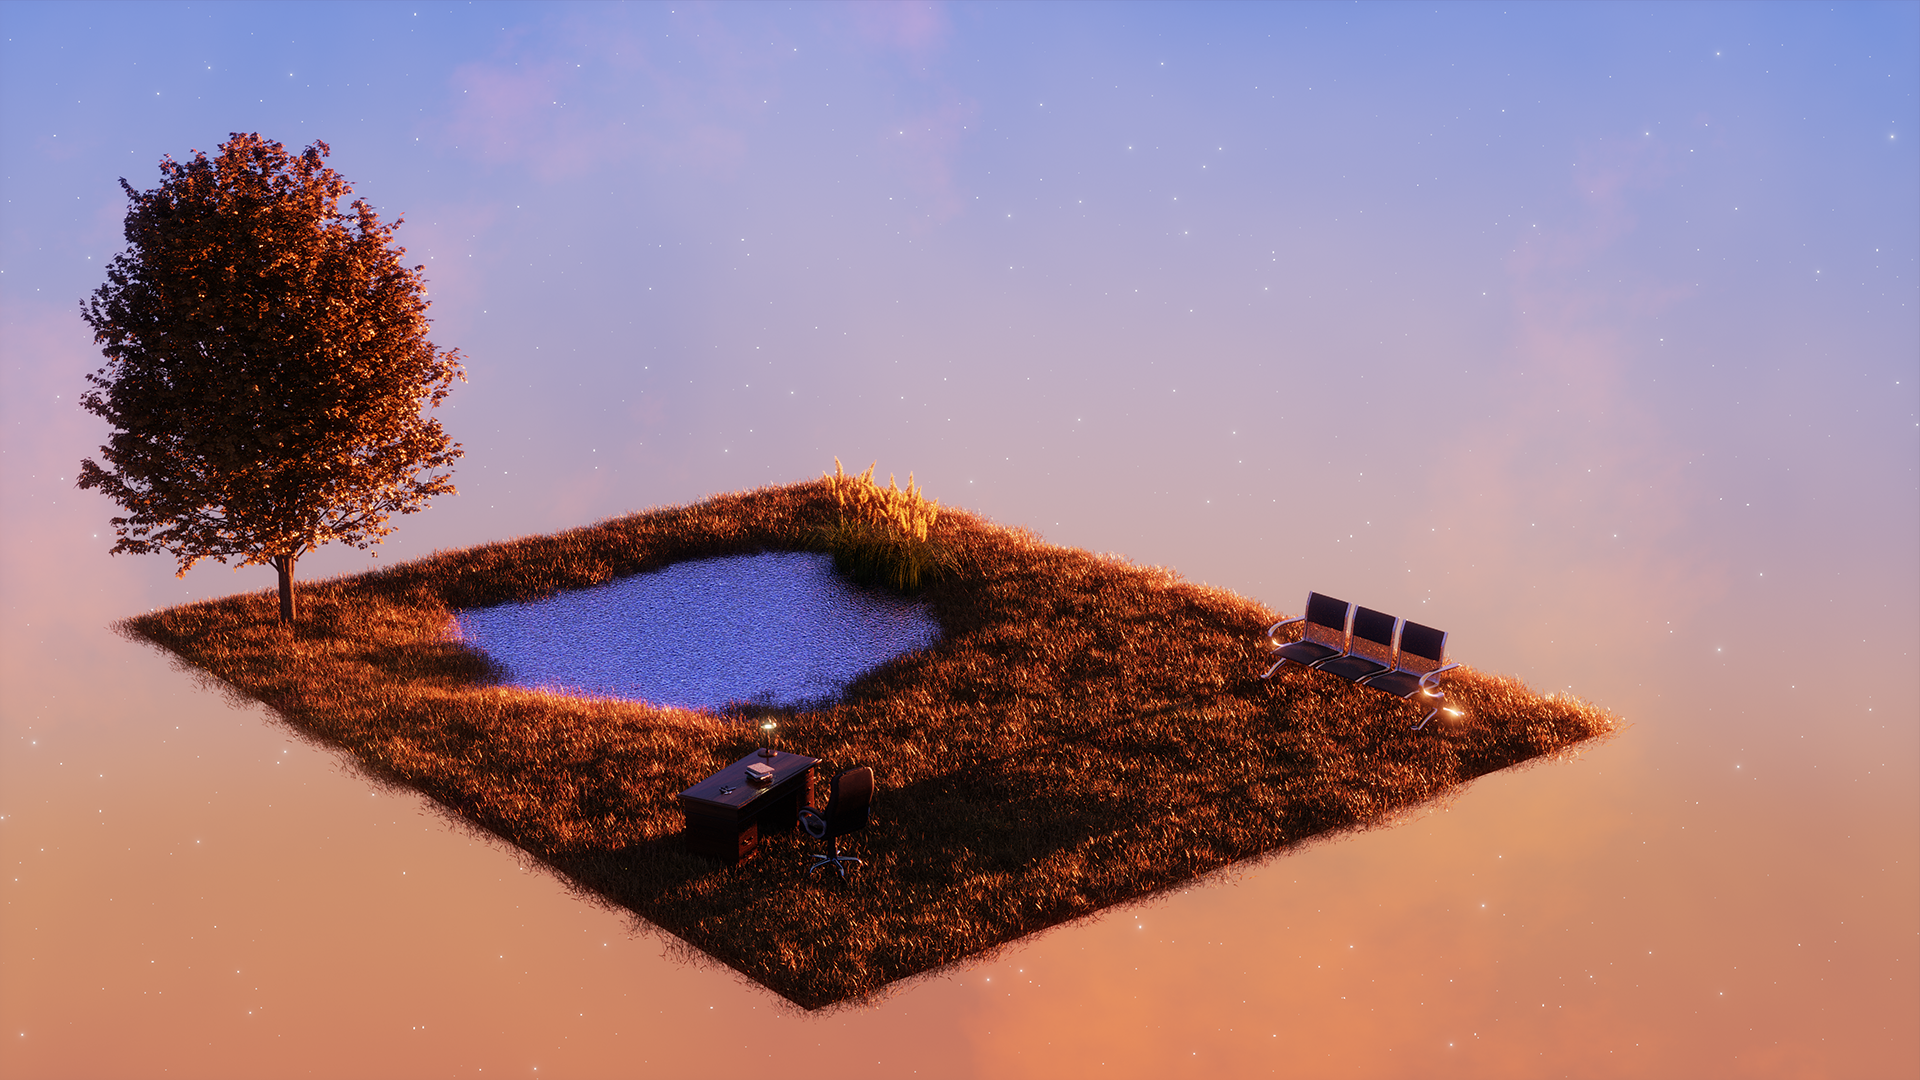 A meadow of wilting brown grass with a pond, an office desk, a waiting room chair bench, and a tree, floating in an orange sky at sunset.